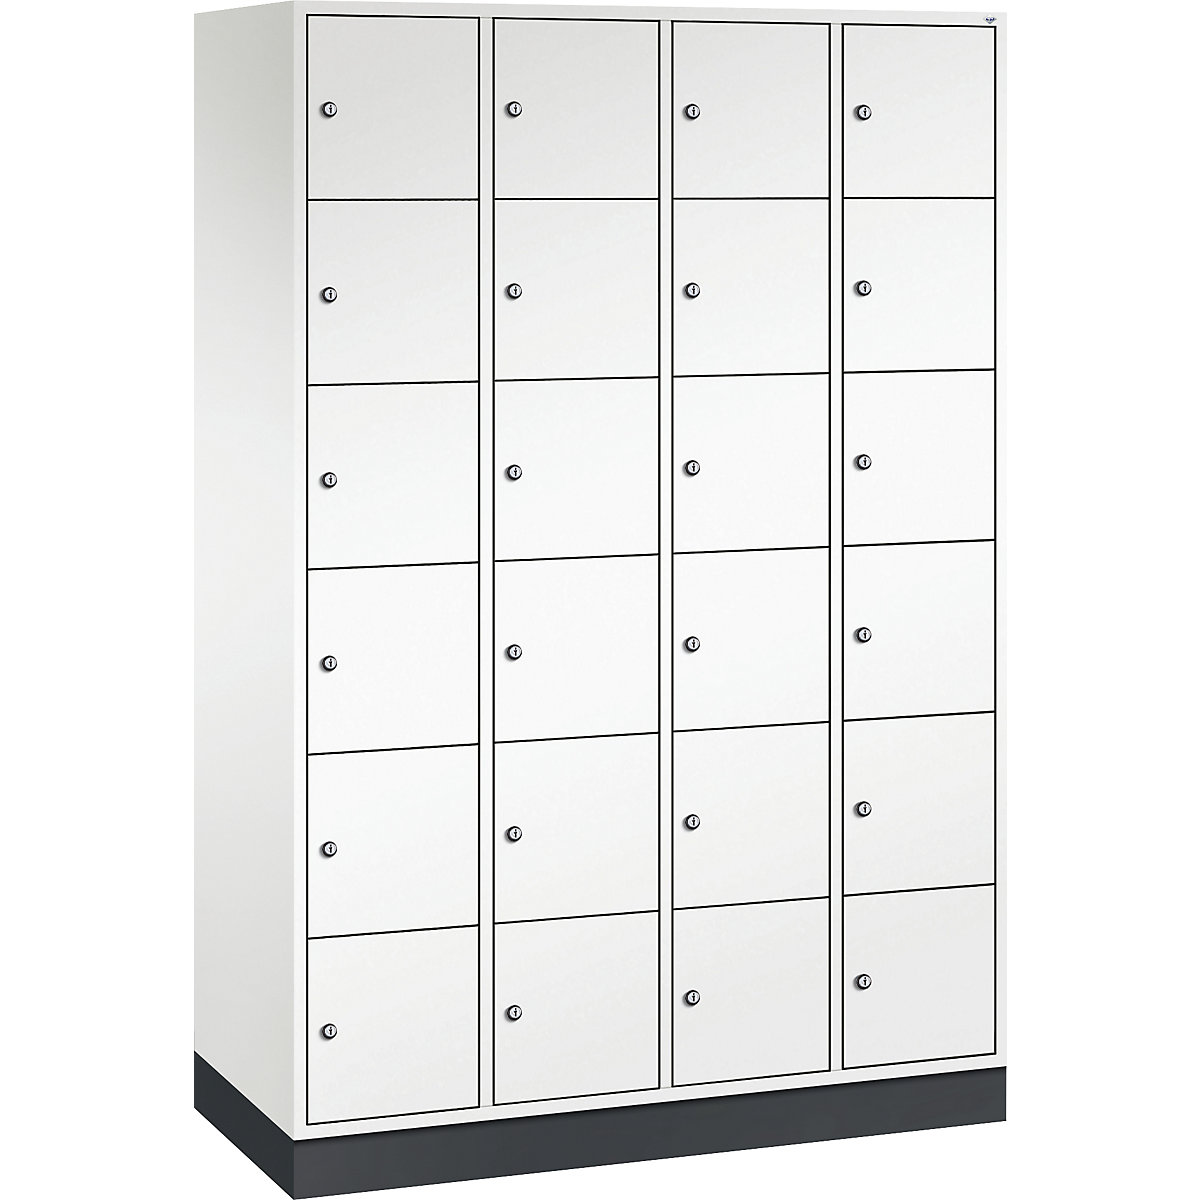 INTRO steel compartment locker, compartment height 285 mm – C+P, WxD 1220 x 500 mm, 24 compartments, pure white body, pure white doors-12